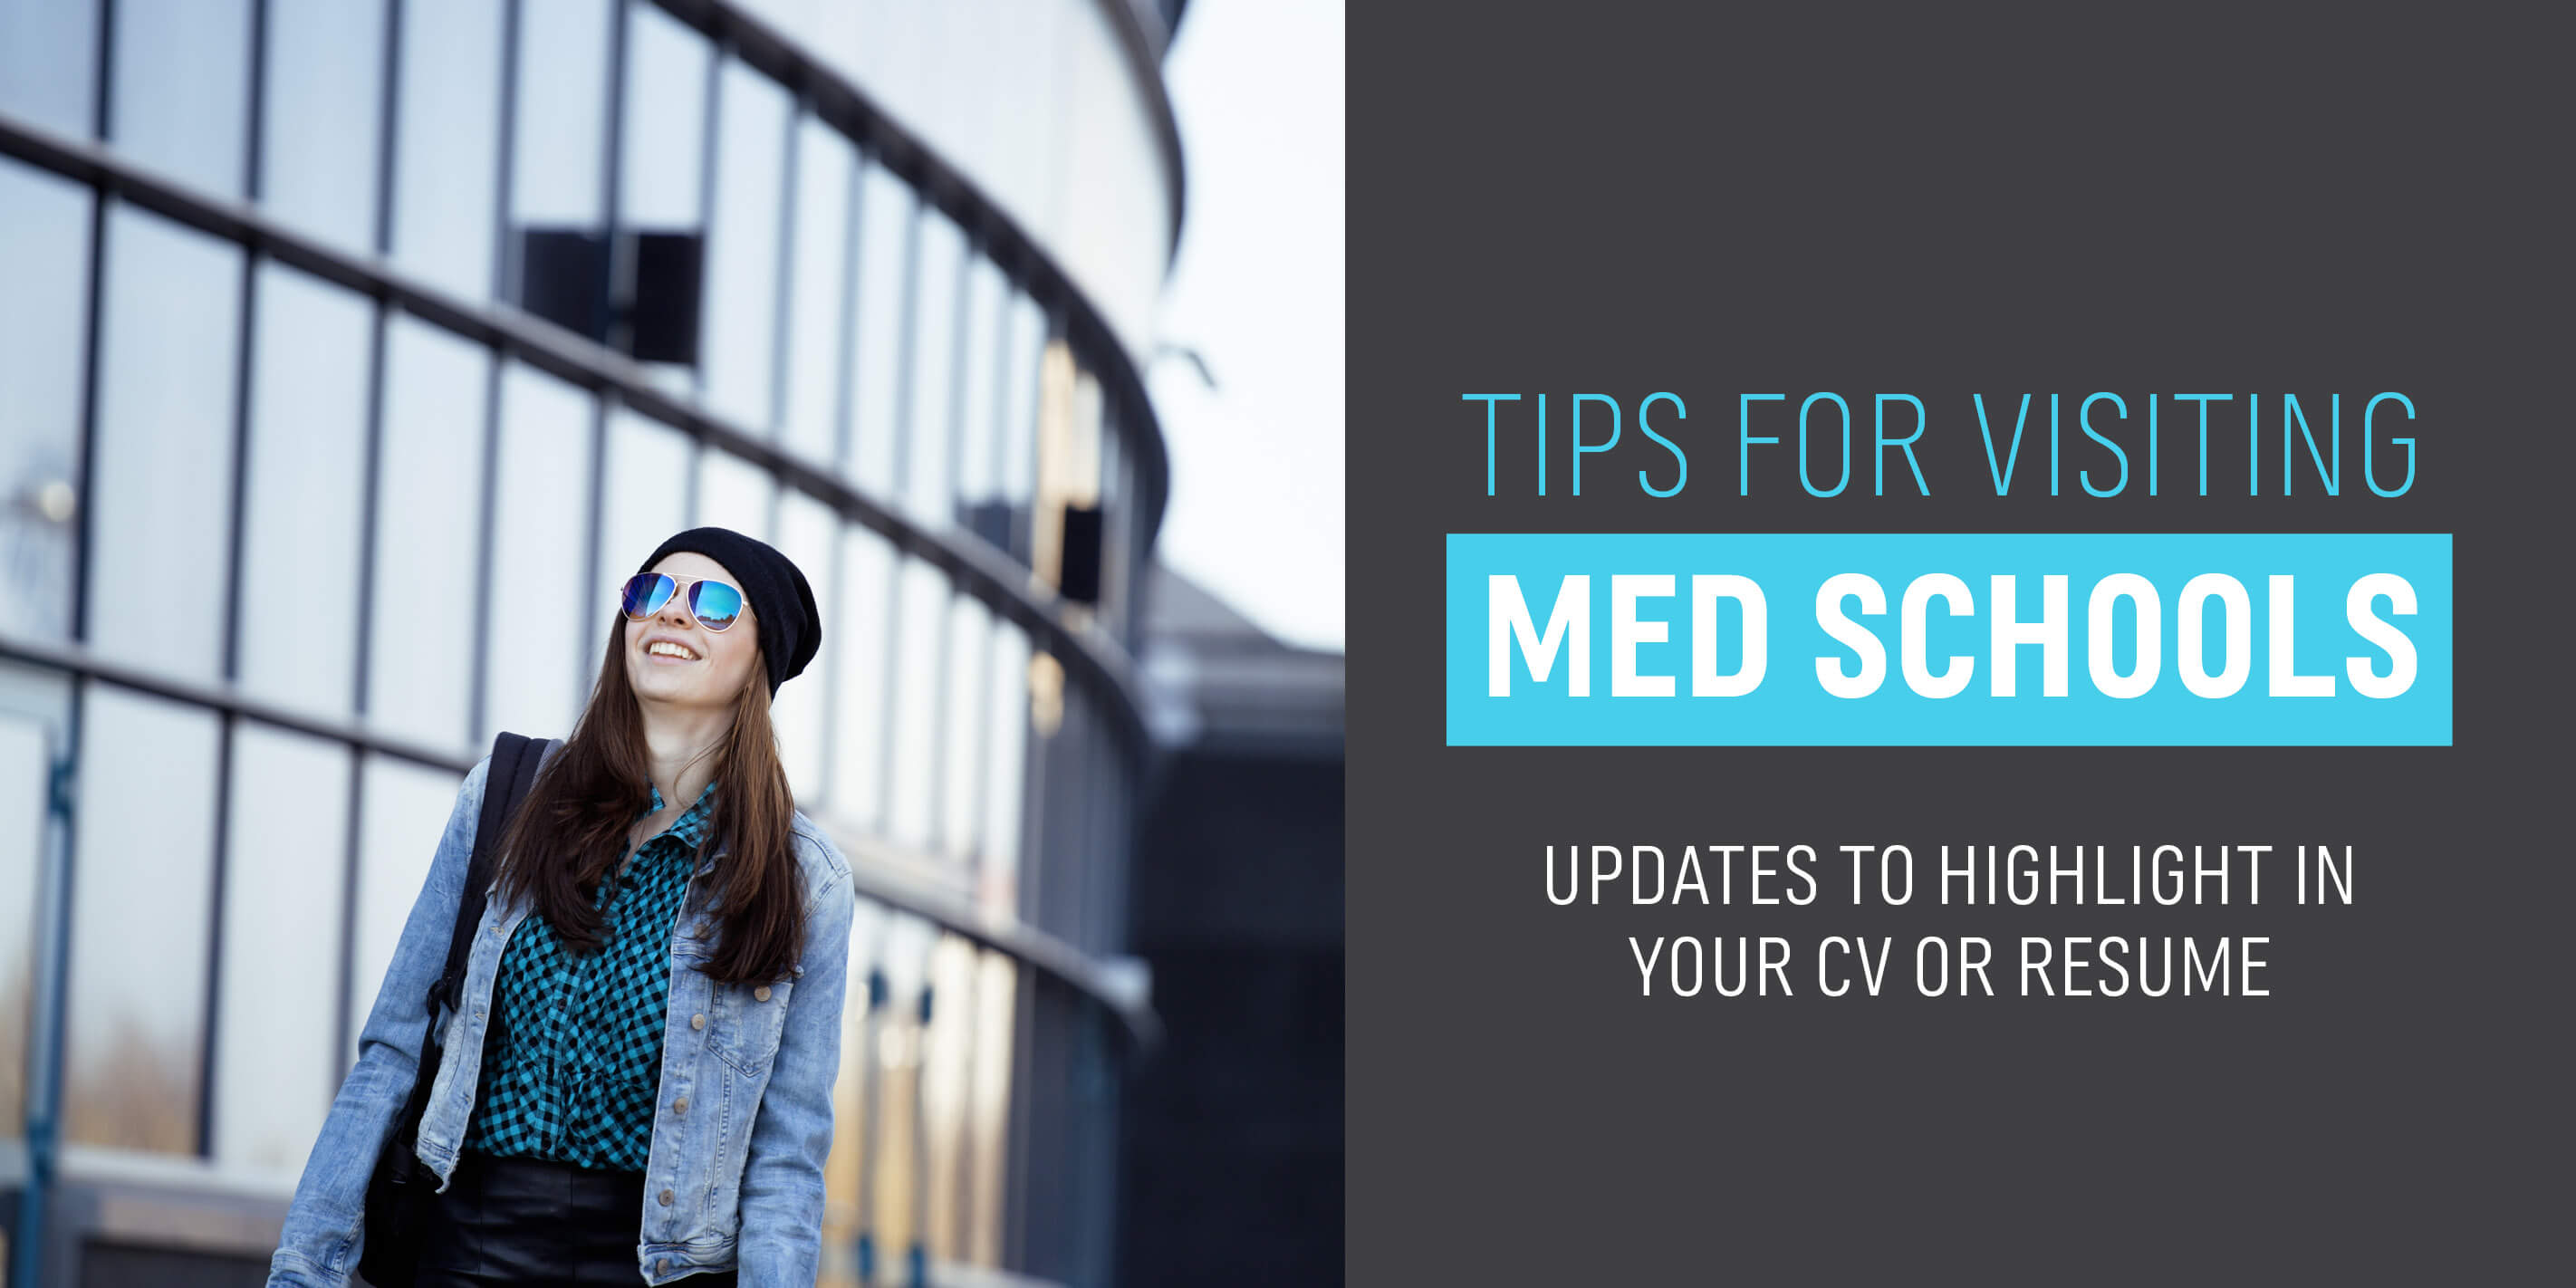 Tips for visiting med schools - Updates to highlight in your CV or resume